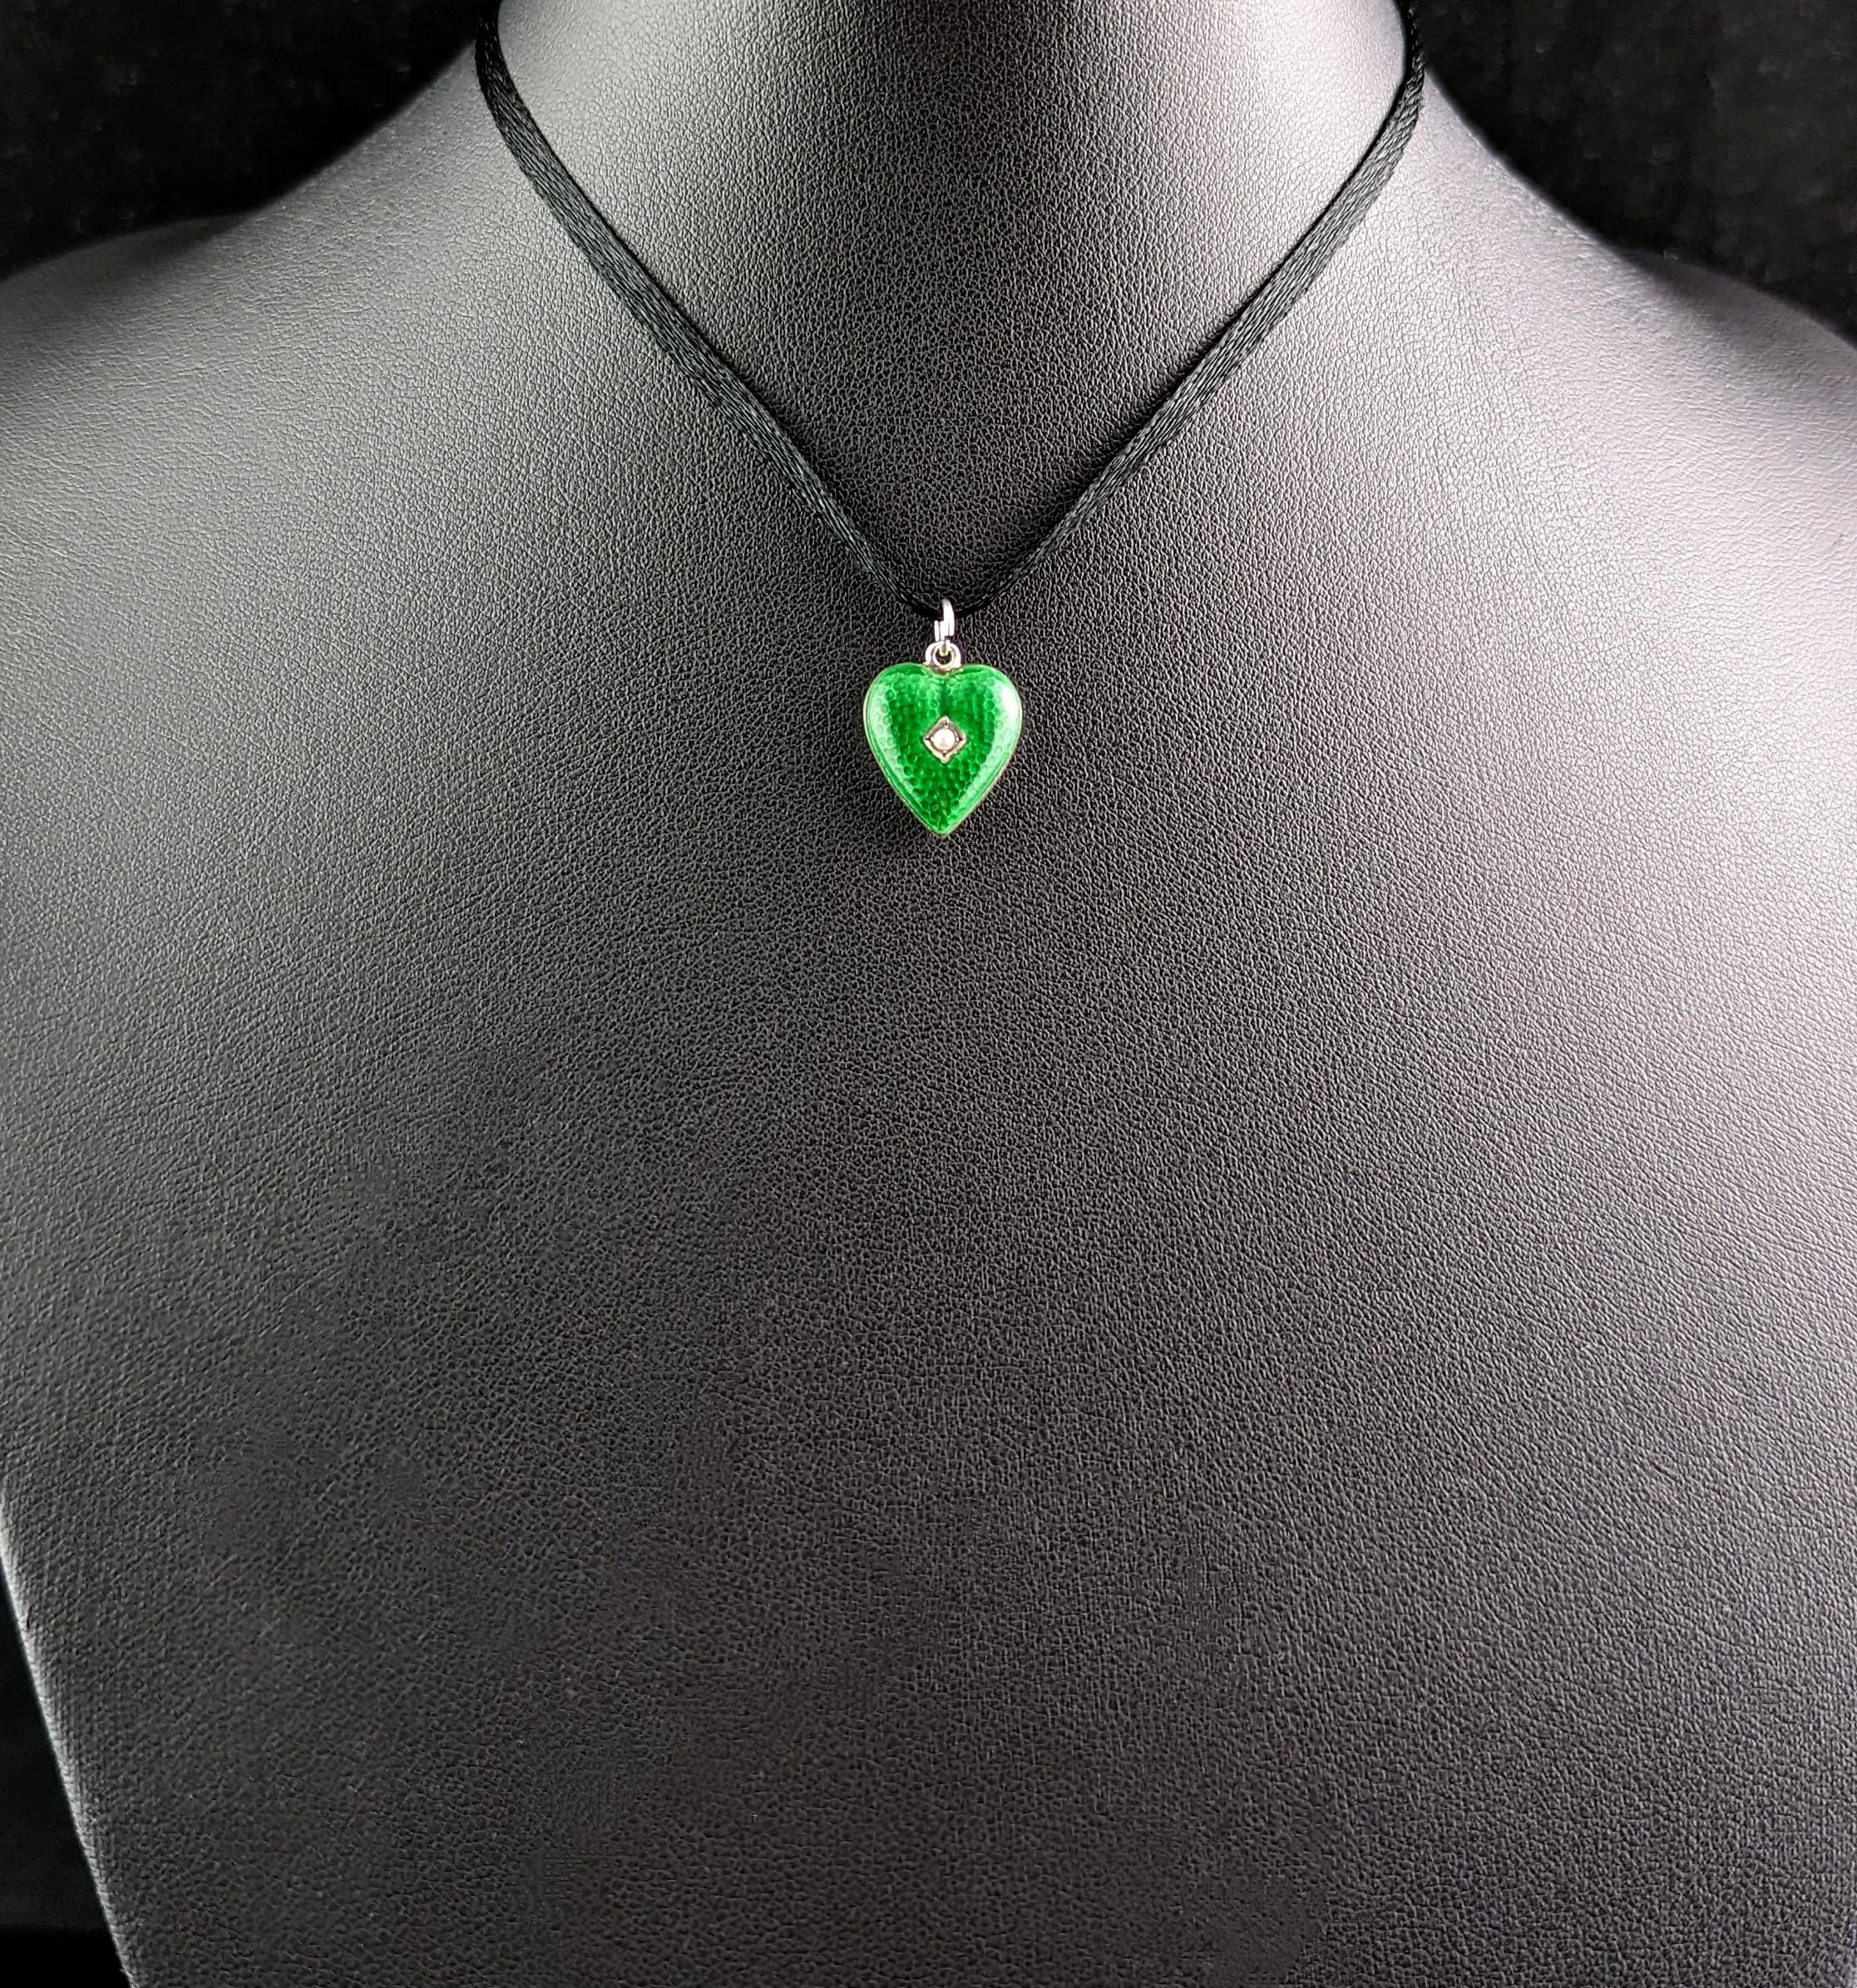 Vintage Art Deco Silver and Green Enamel Heart Pendant, Seed Pearl 3